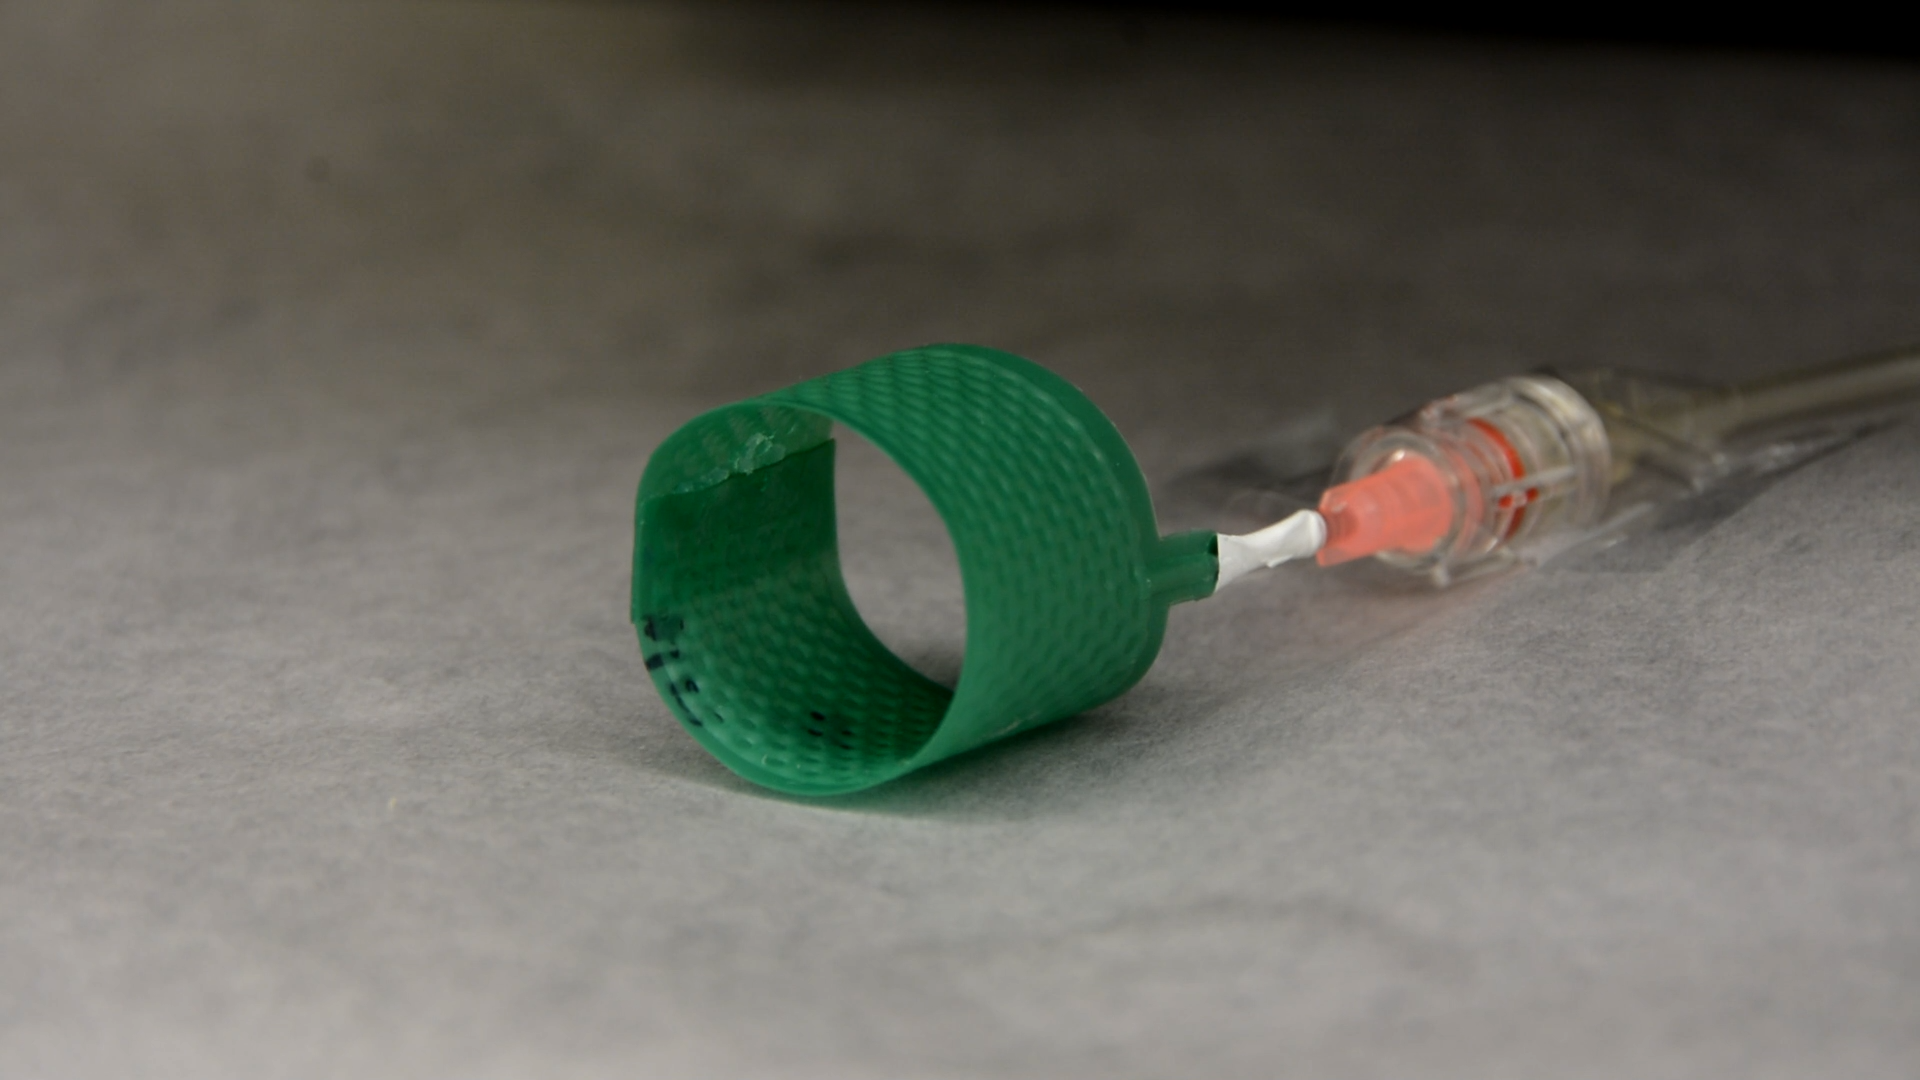 Fabricating Inflatable Stents using Soft Robotic Technology [Video]